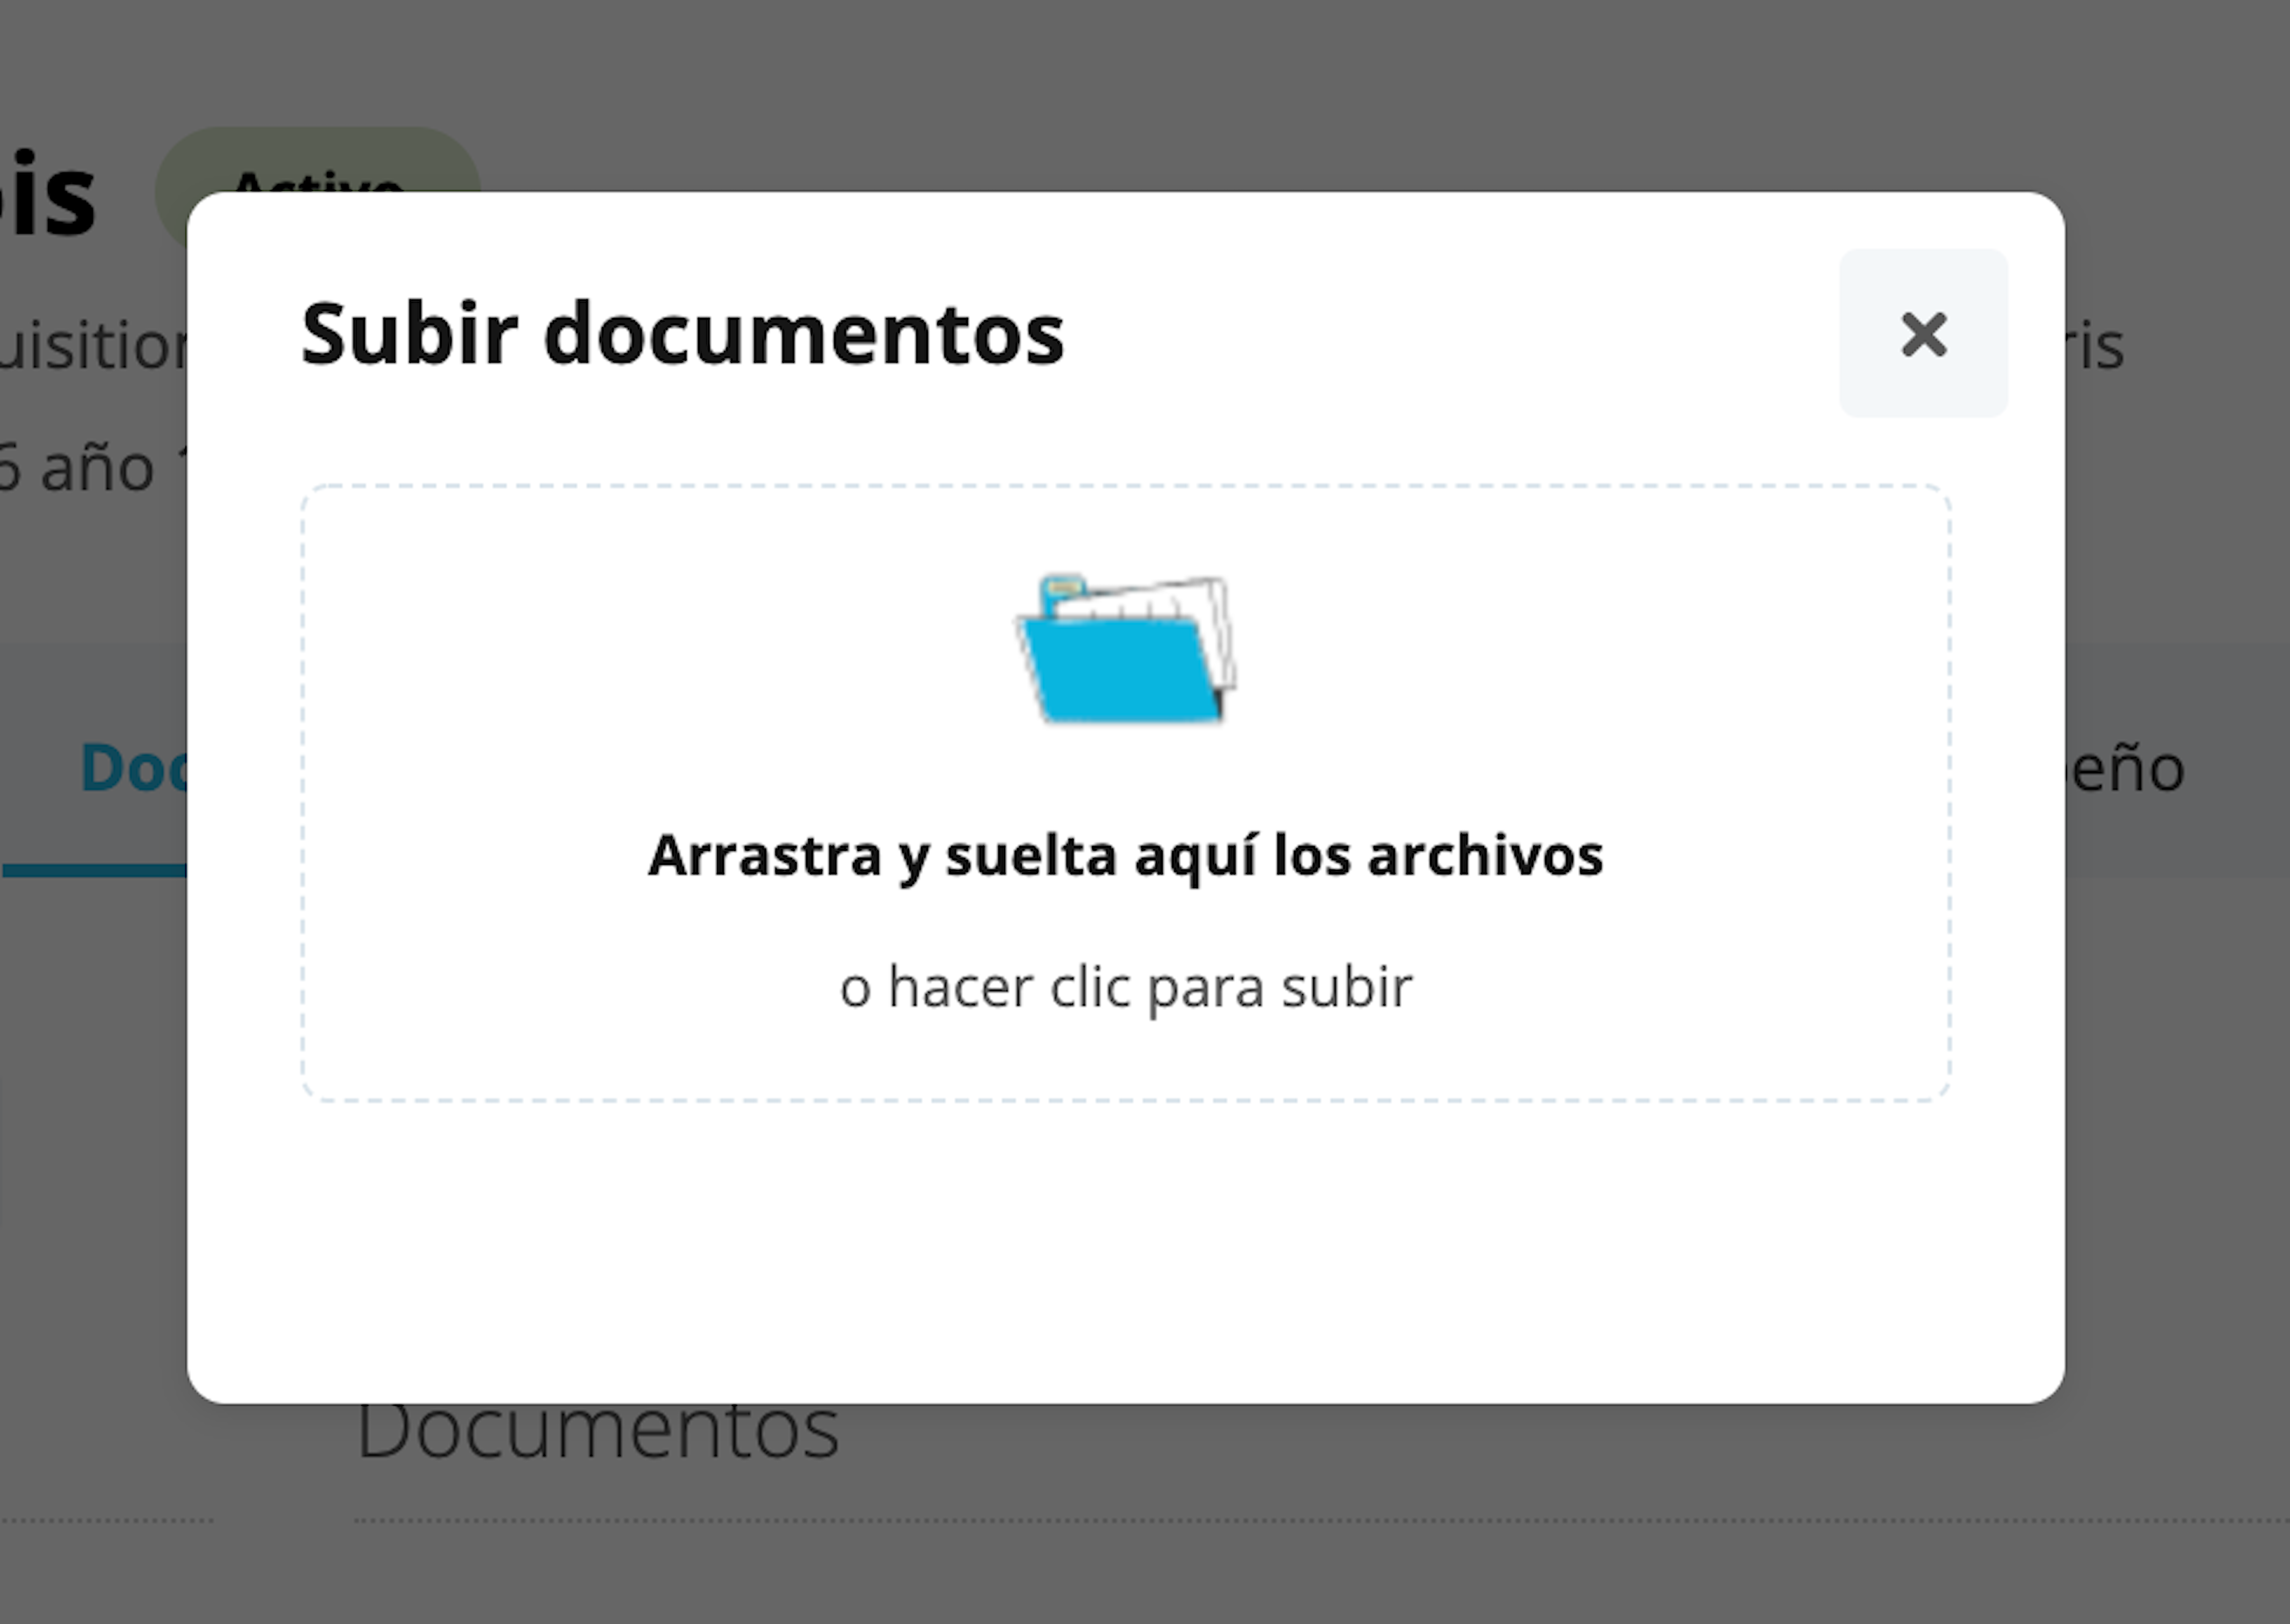 profile-document-upload-work-contract_es.png